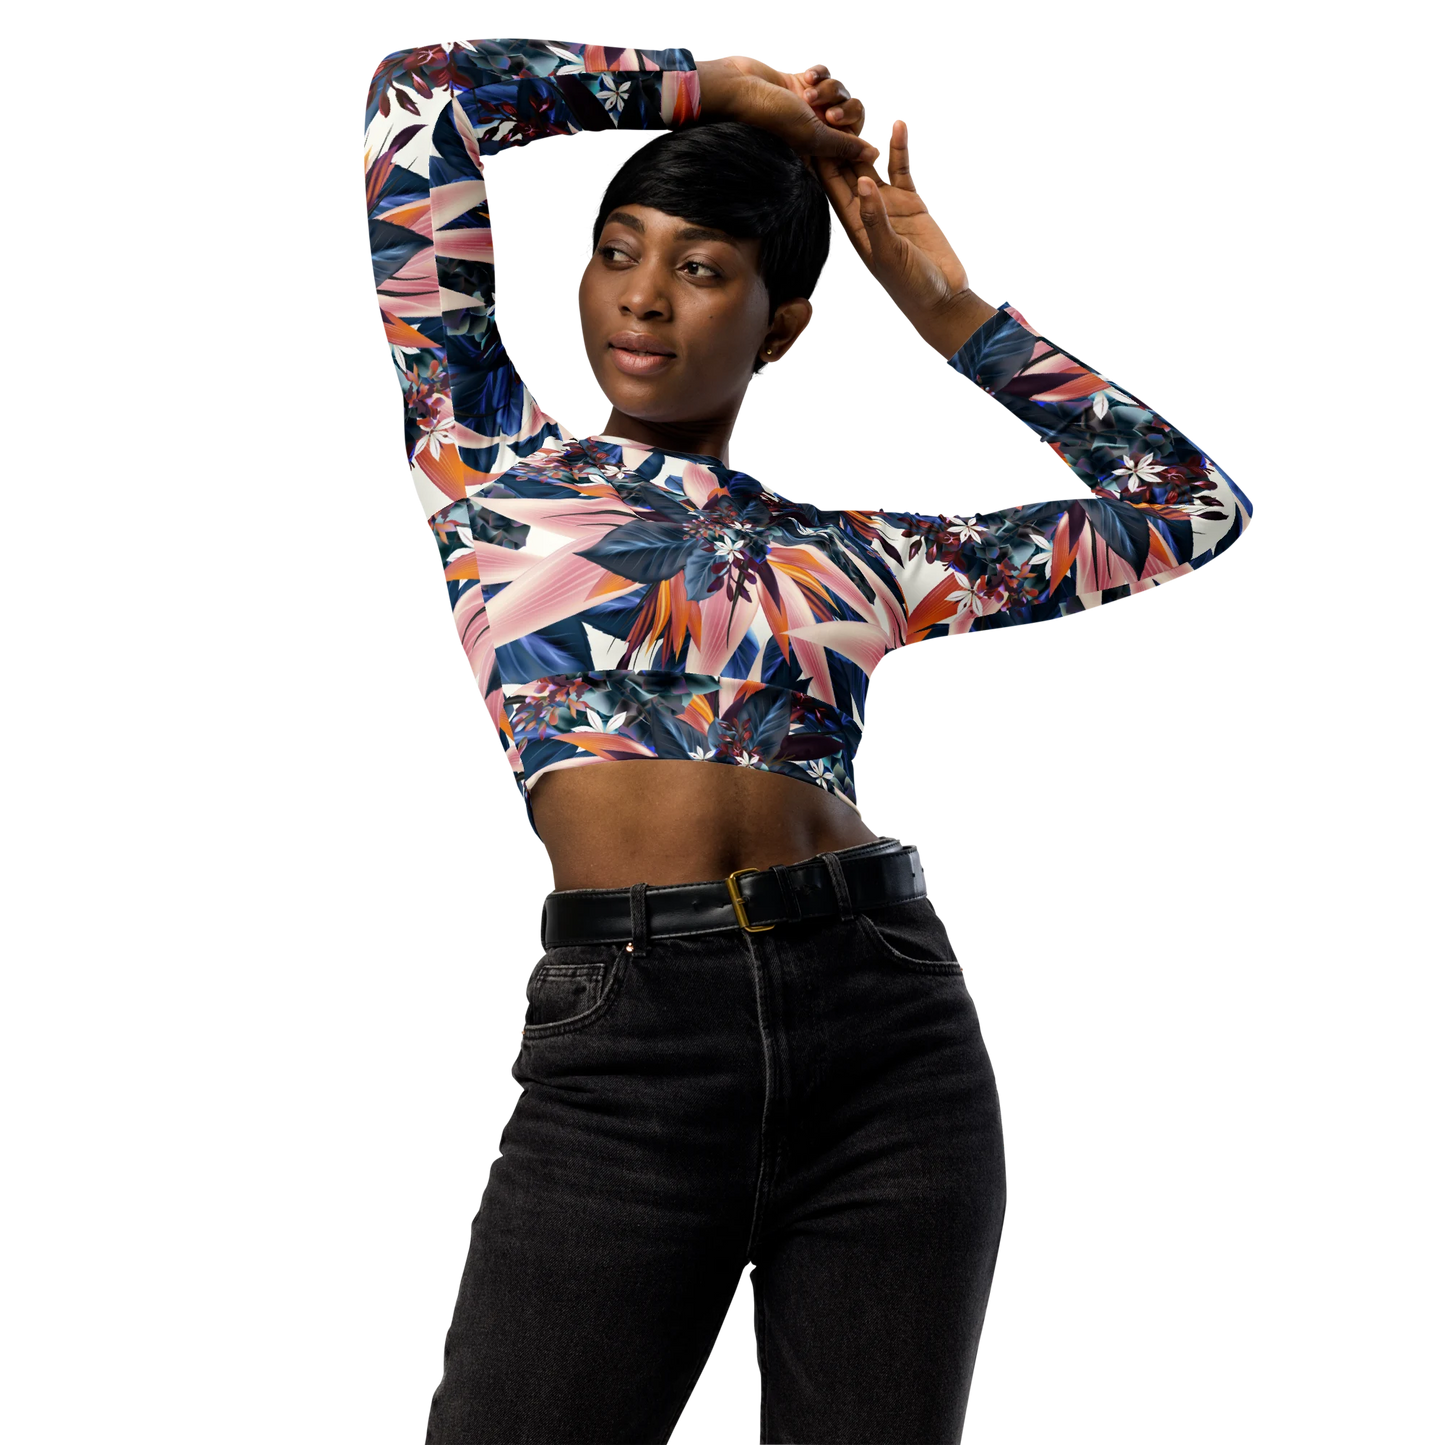 Tropical Beauty Recycled Long-sleeve Crop Top